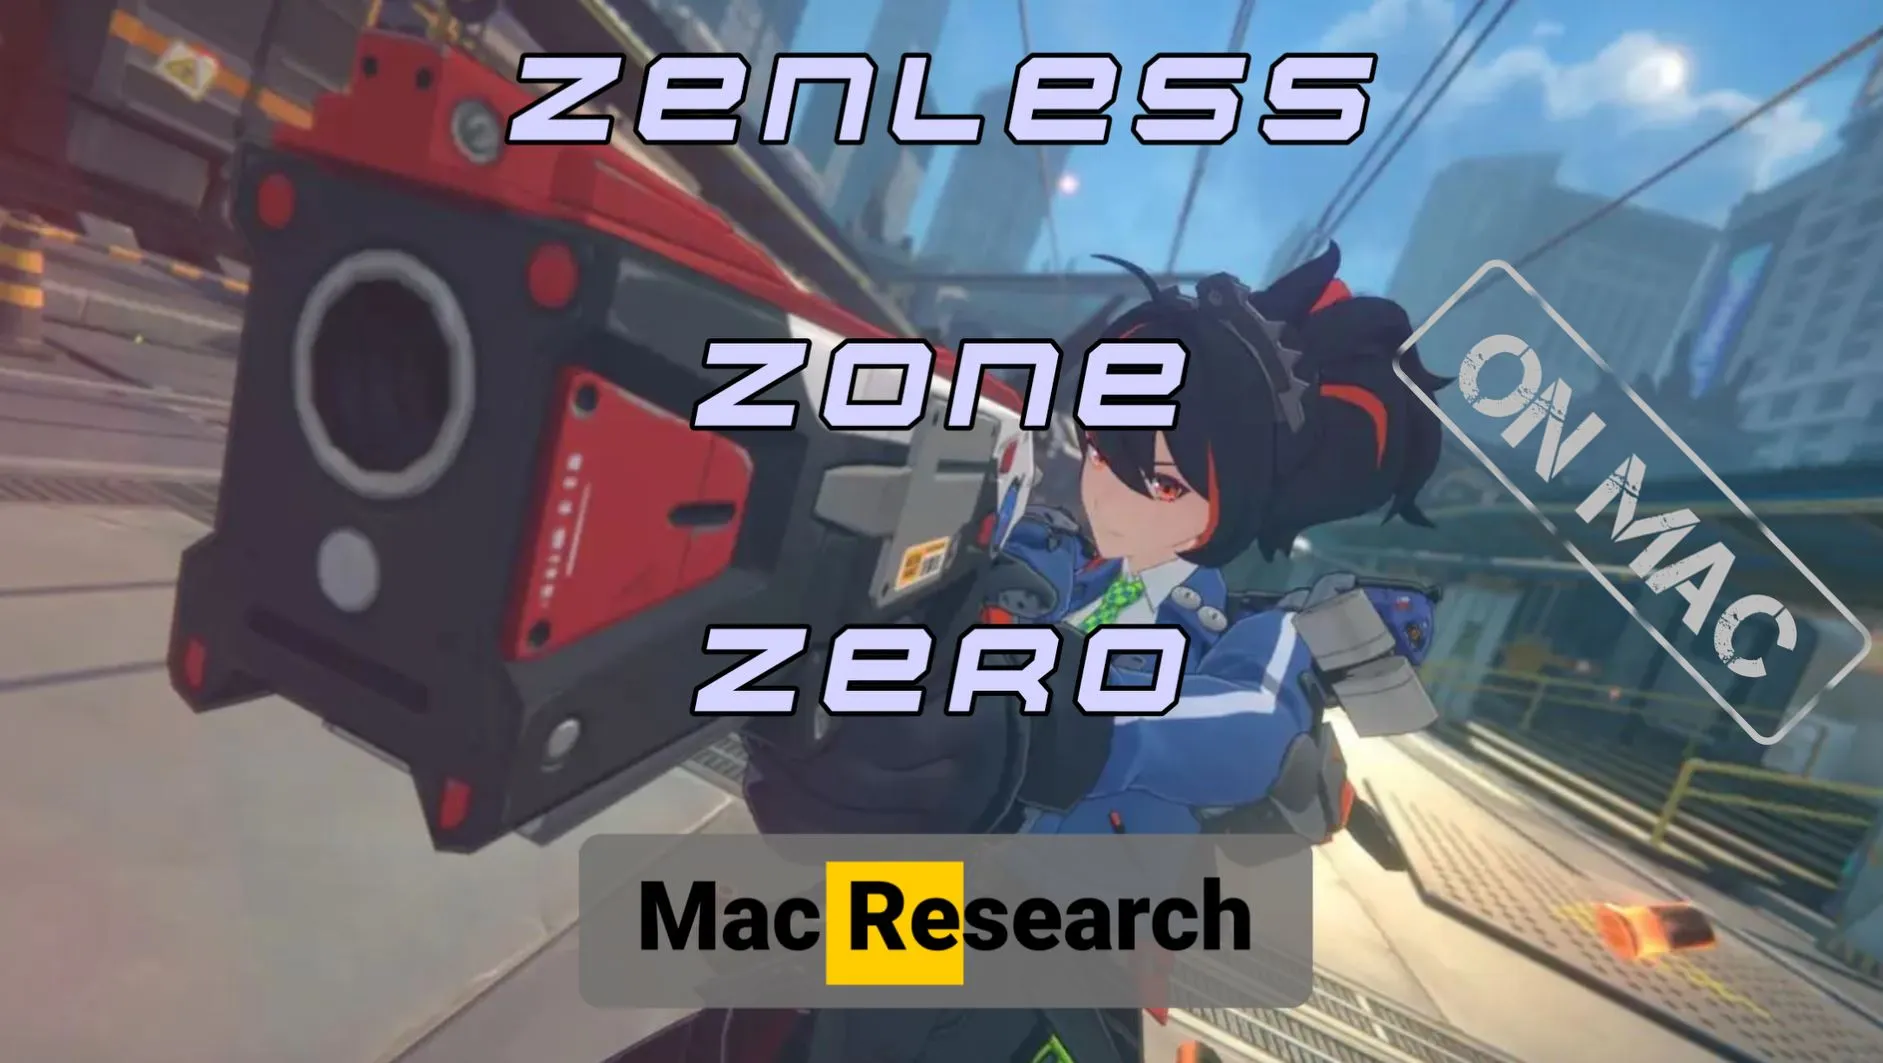 How to Play Zenless Zone Zero on Mac: The Fullest Guide